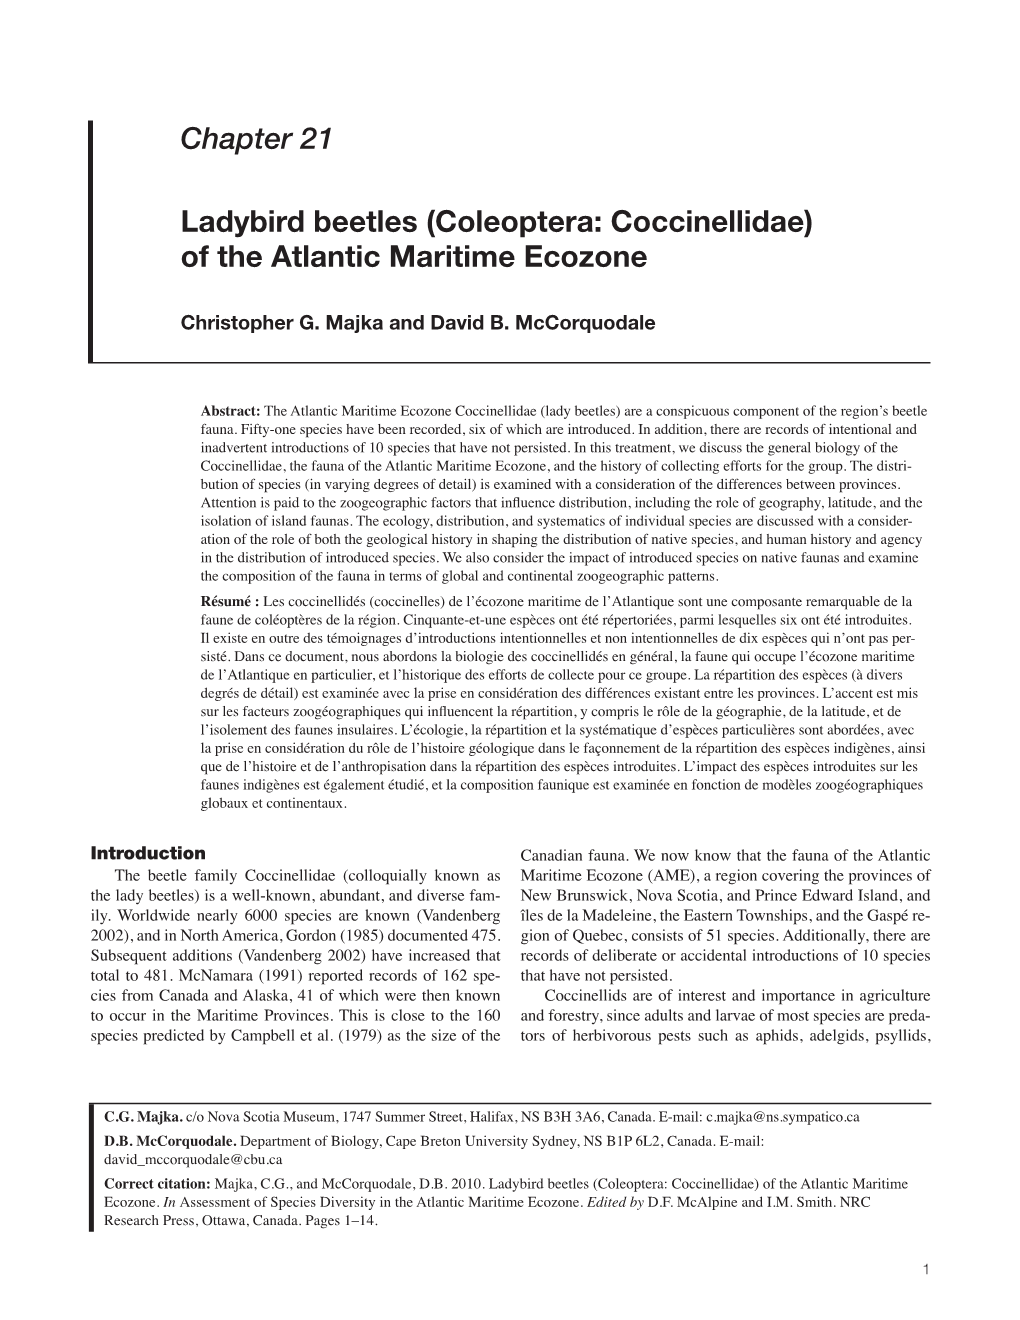 Chapter 21 Ladybird Beetles (Coleoptera: Coccinellidae) of The